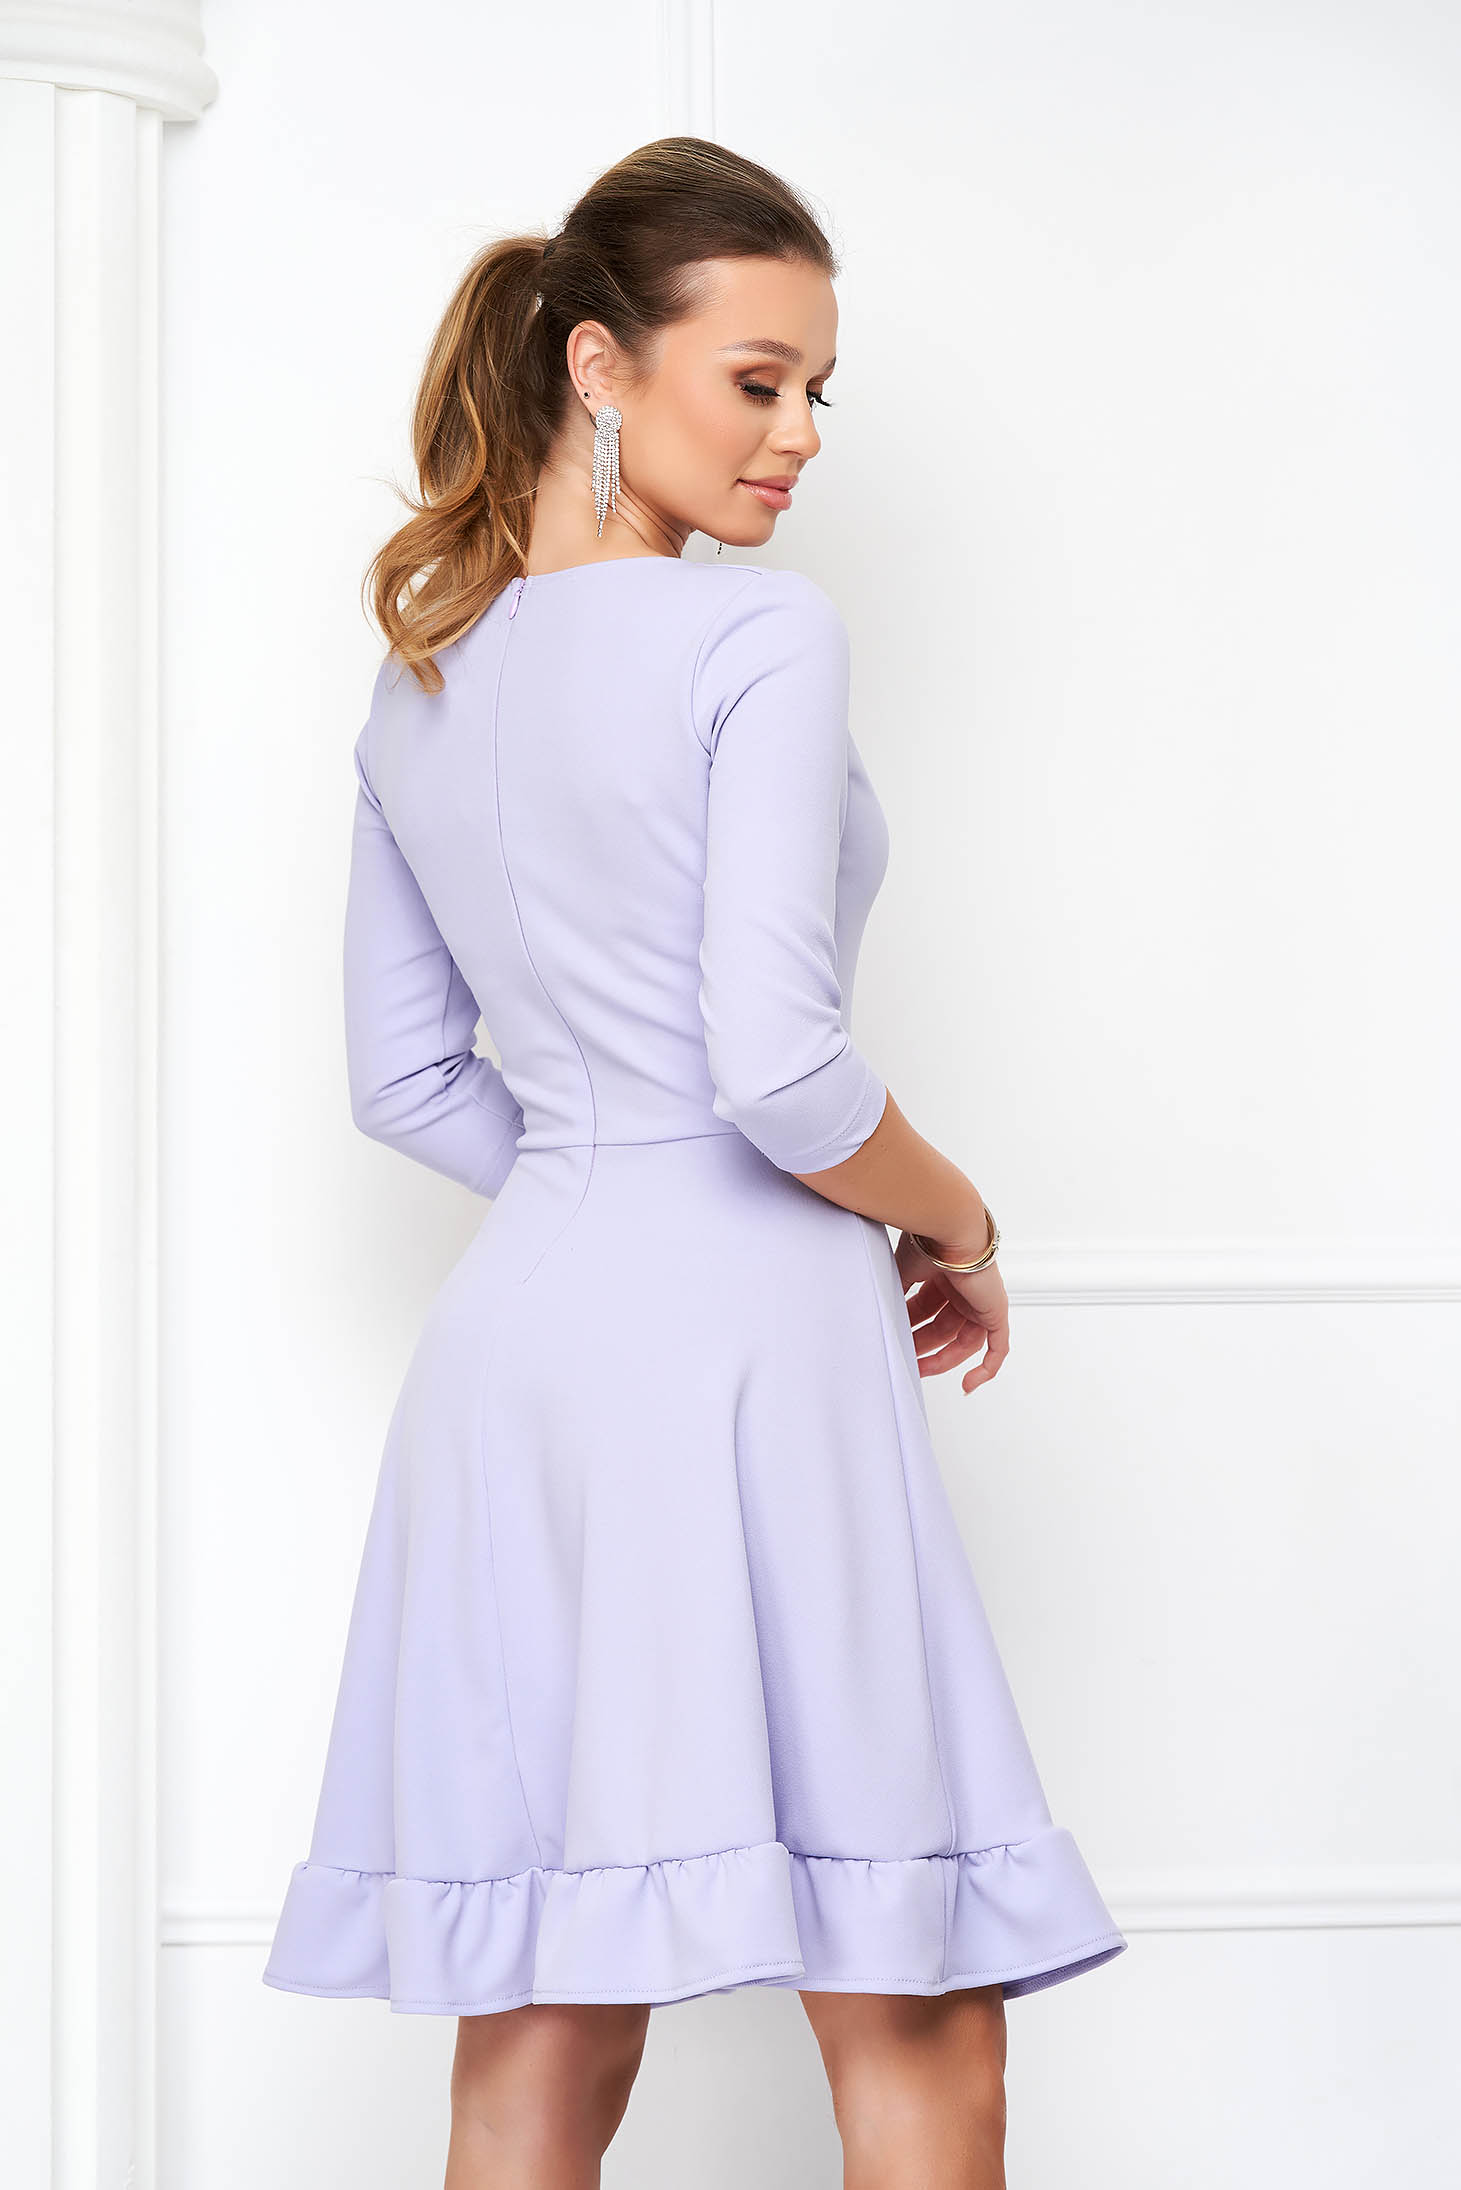 Lilac crepe dress in A-line with dropped neckline and ruffles at the base of the dress - StarShinerS 2 - StarShinerS.com